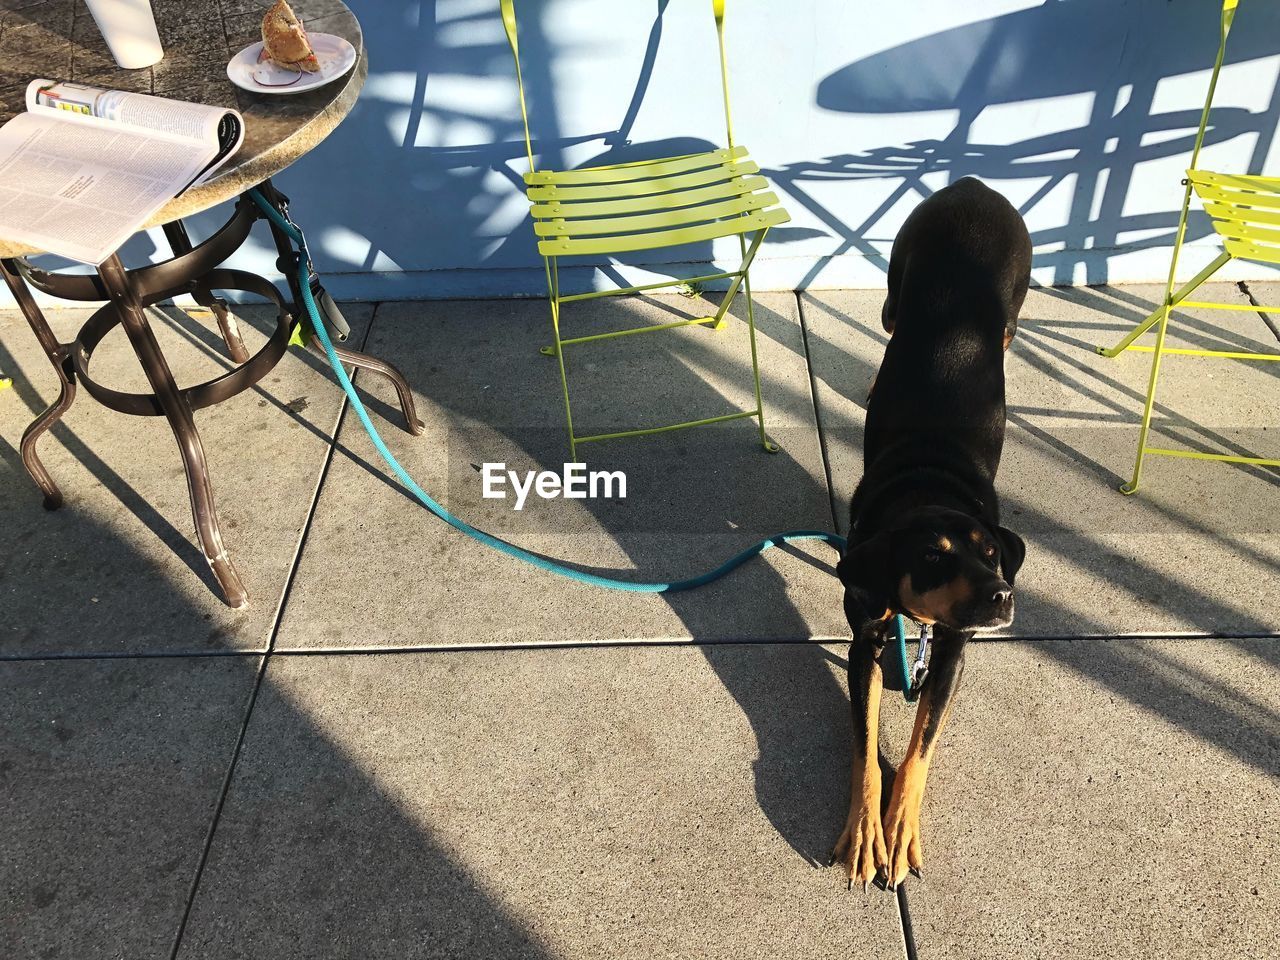 HIGH ANGLE VIEW OF DOG ON SHADOW OF PERSON